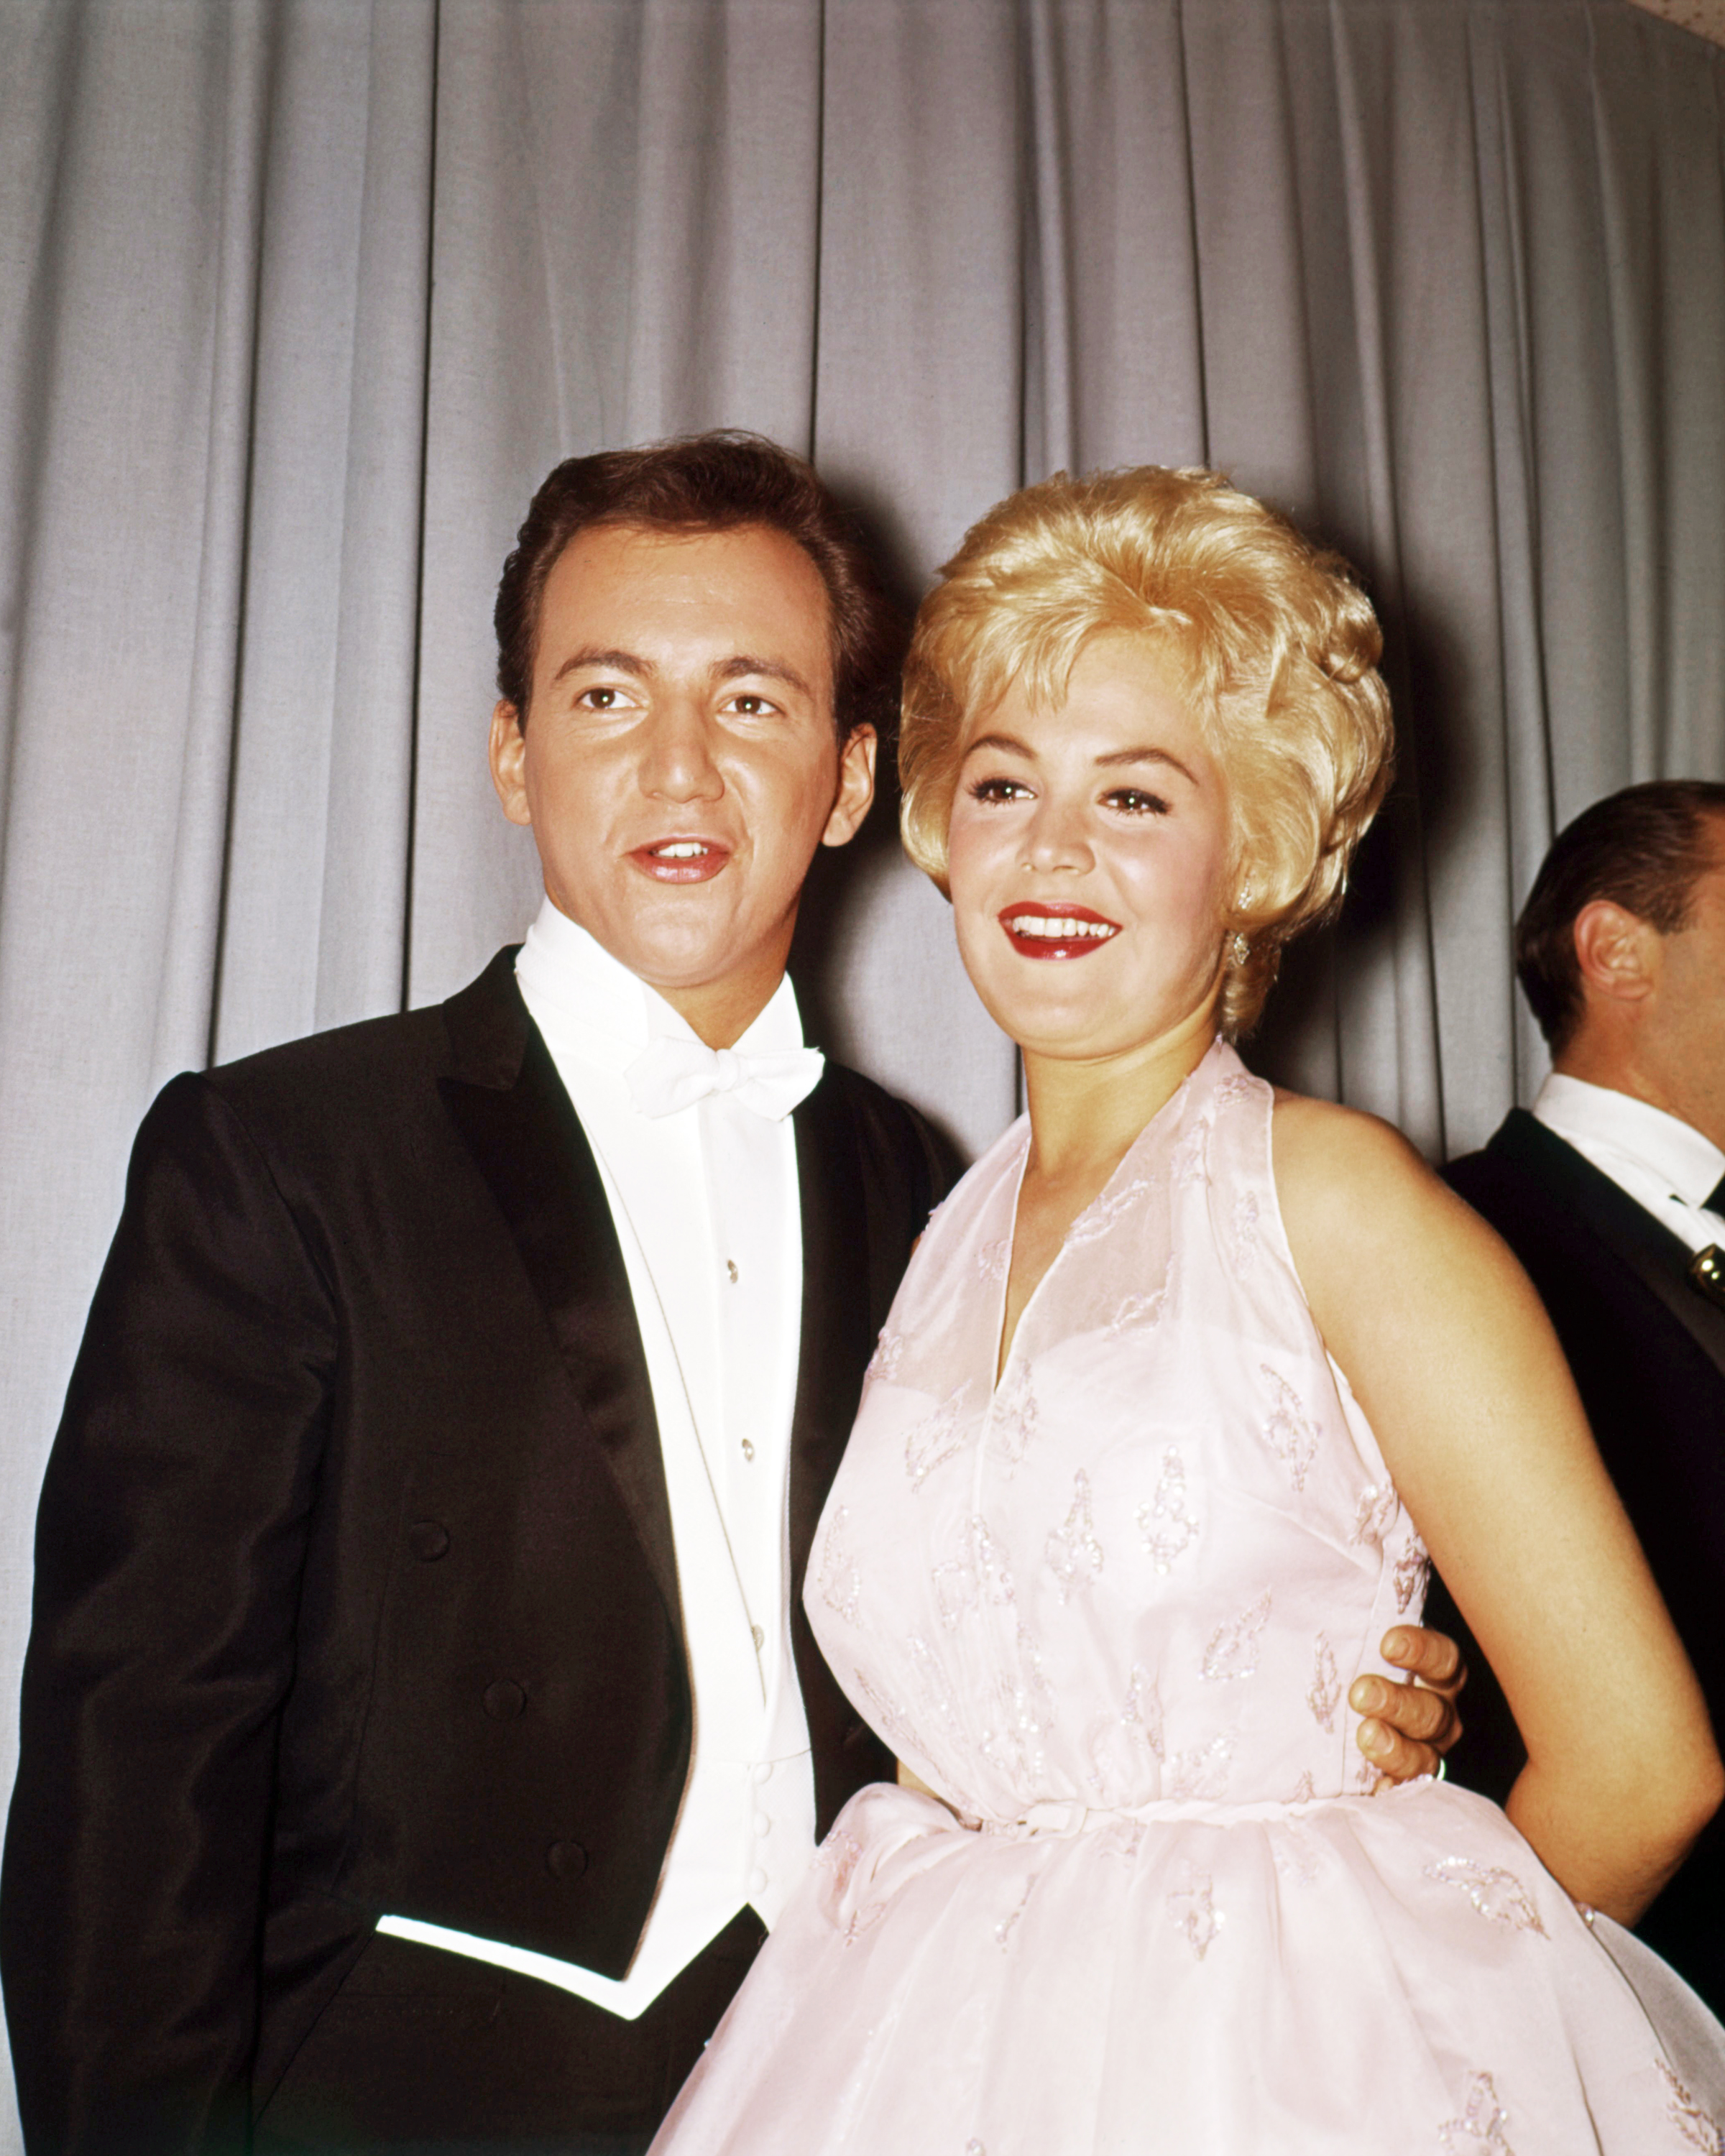 Bobby Darin and Sandra Dee at the 33rd Academy Awards in California in 1961 | Source: Getty Images